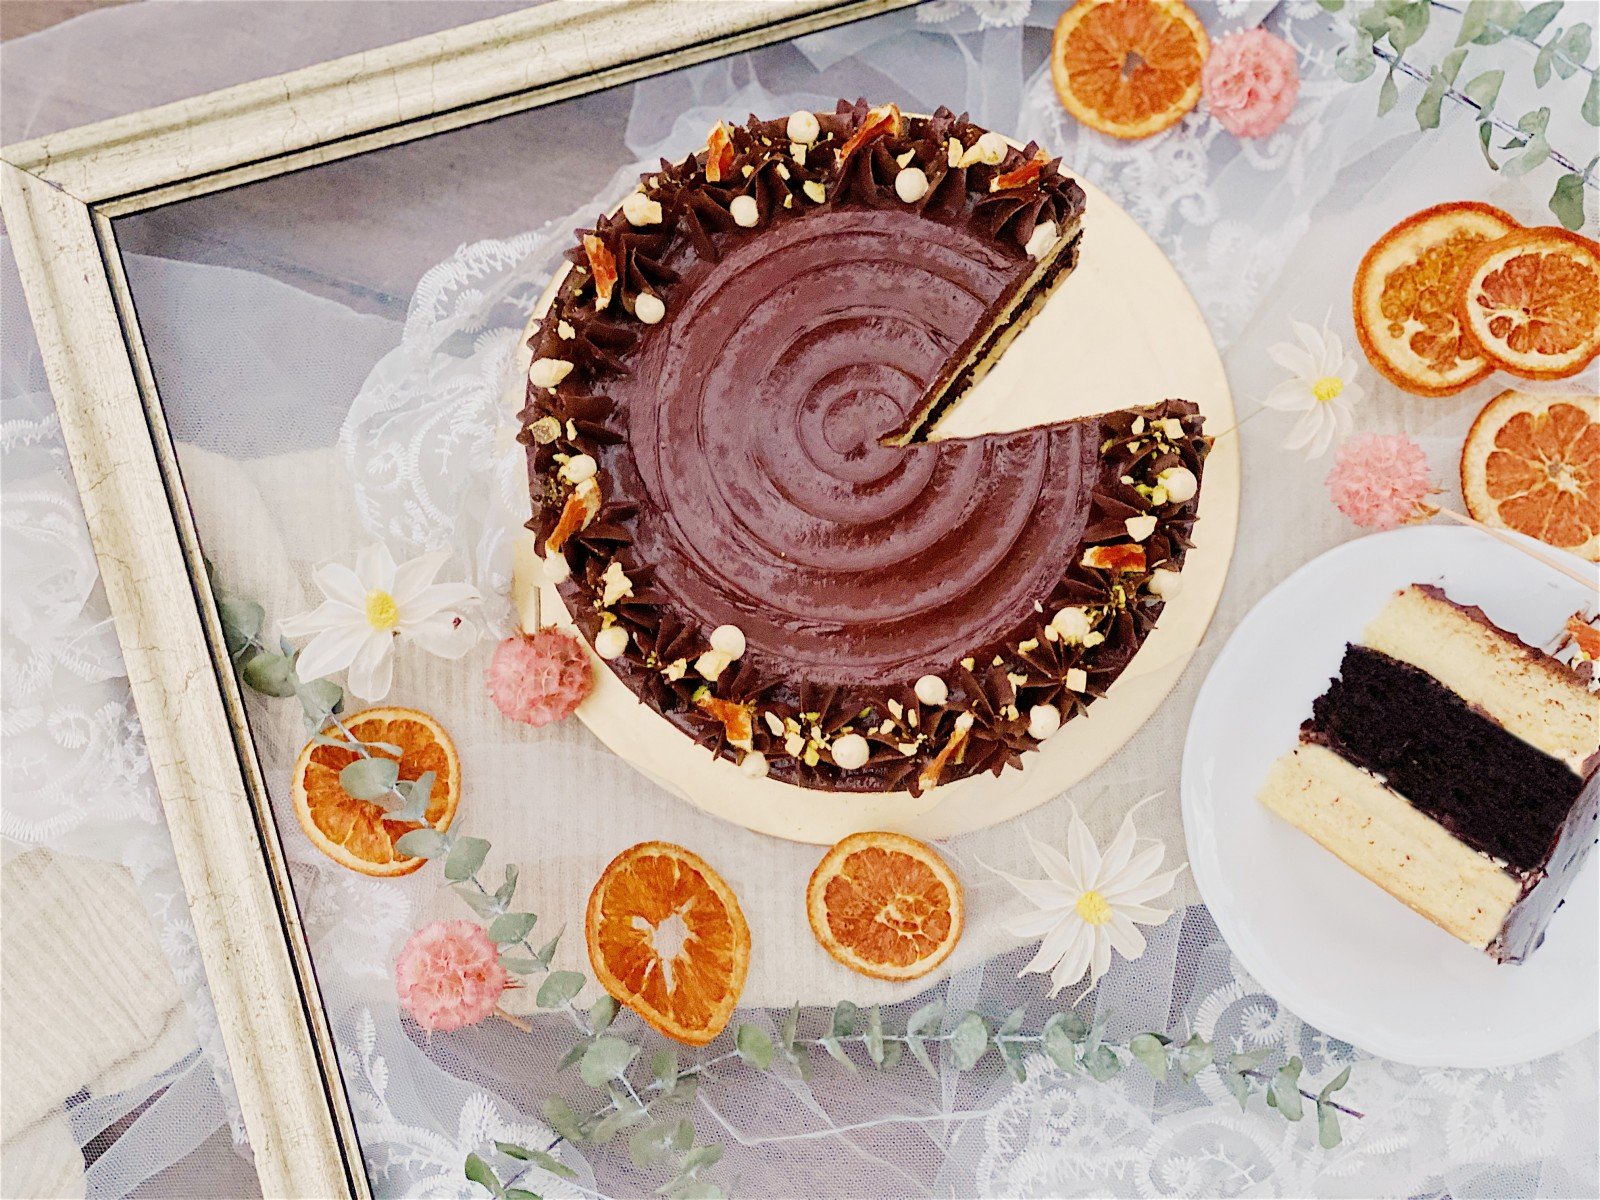 Each slice tells a story of love and commitment - make your wedding memorable with our decadent cakes.